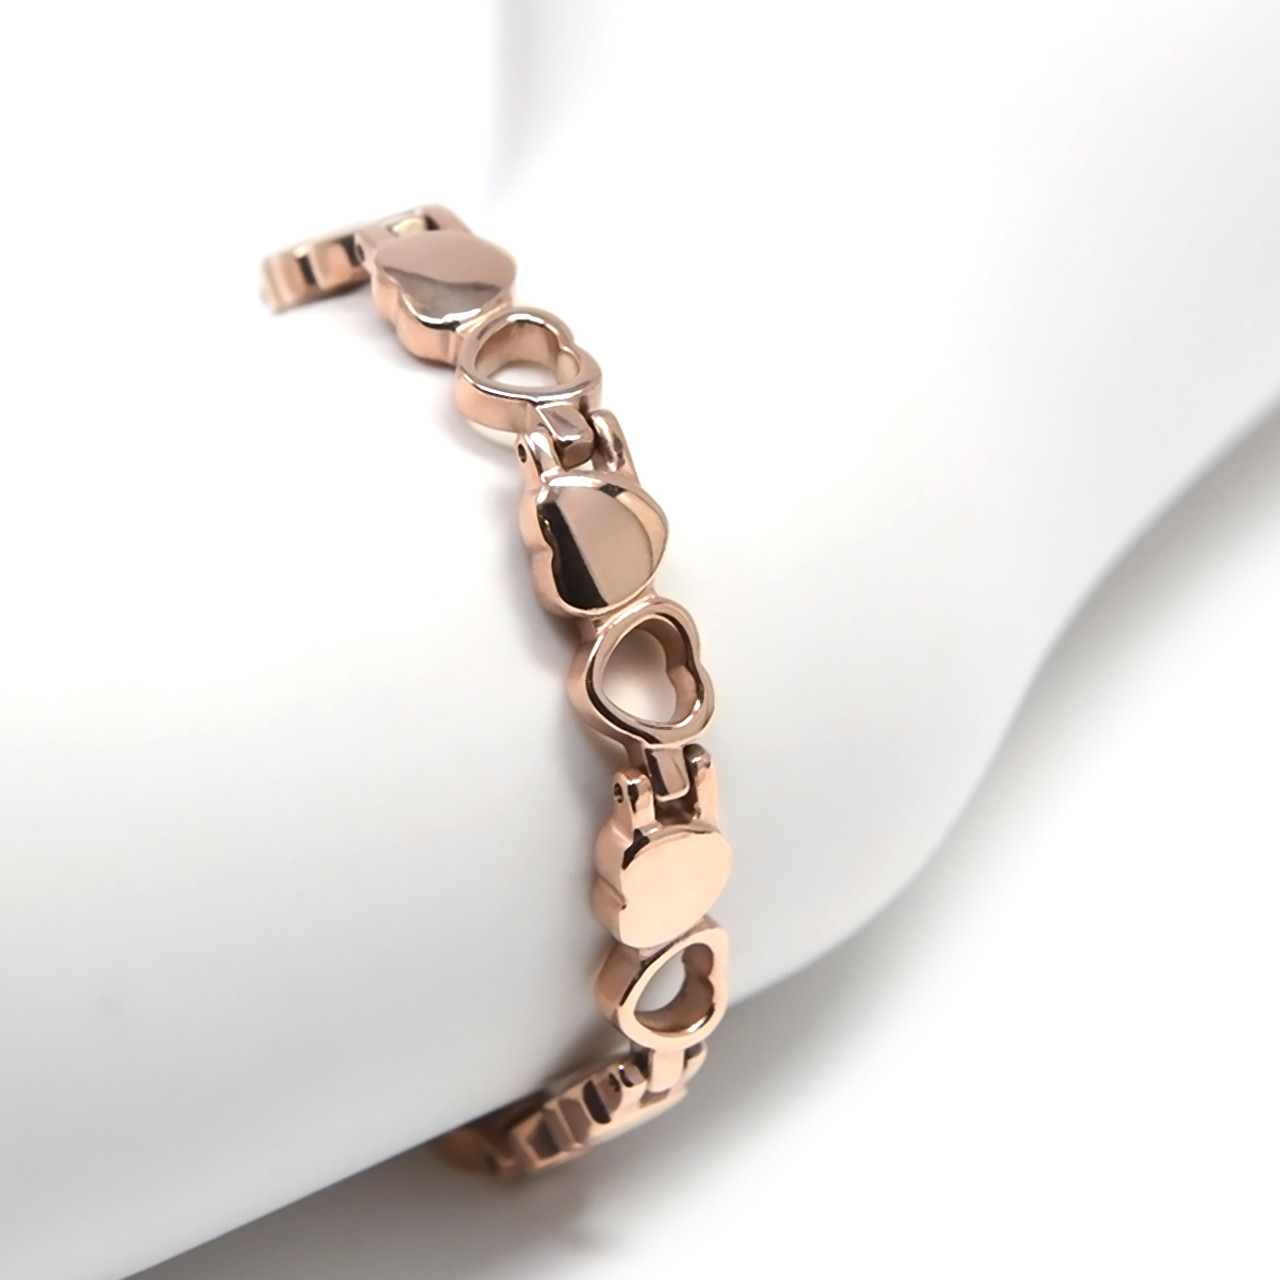 <img src=" womens  stainless & gold color magnet bracelet .png" alt="casual magnetic therapy jewelry   side view Magnetic  bracelet Jewelry Novoa Women 's  Rose Gold  B185QM-0">